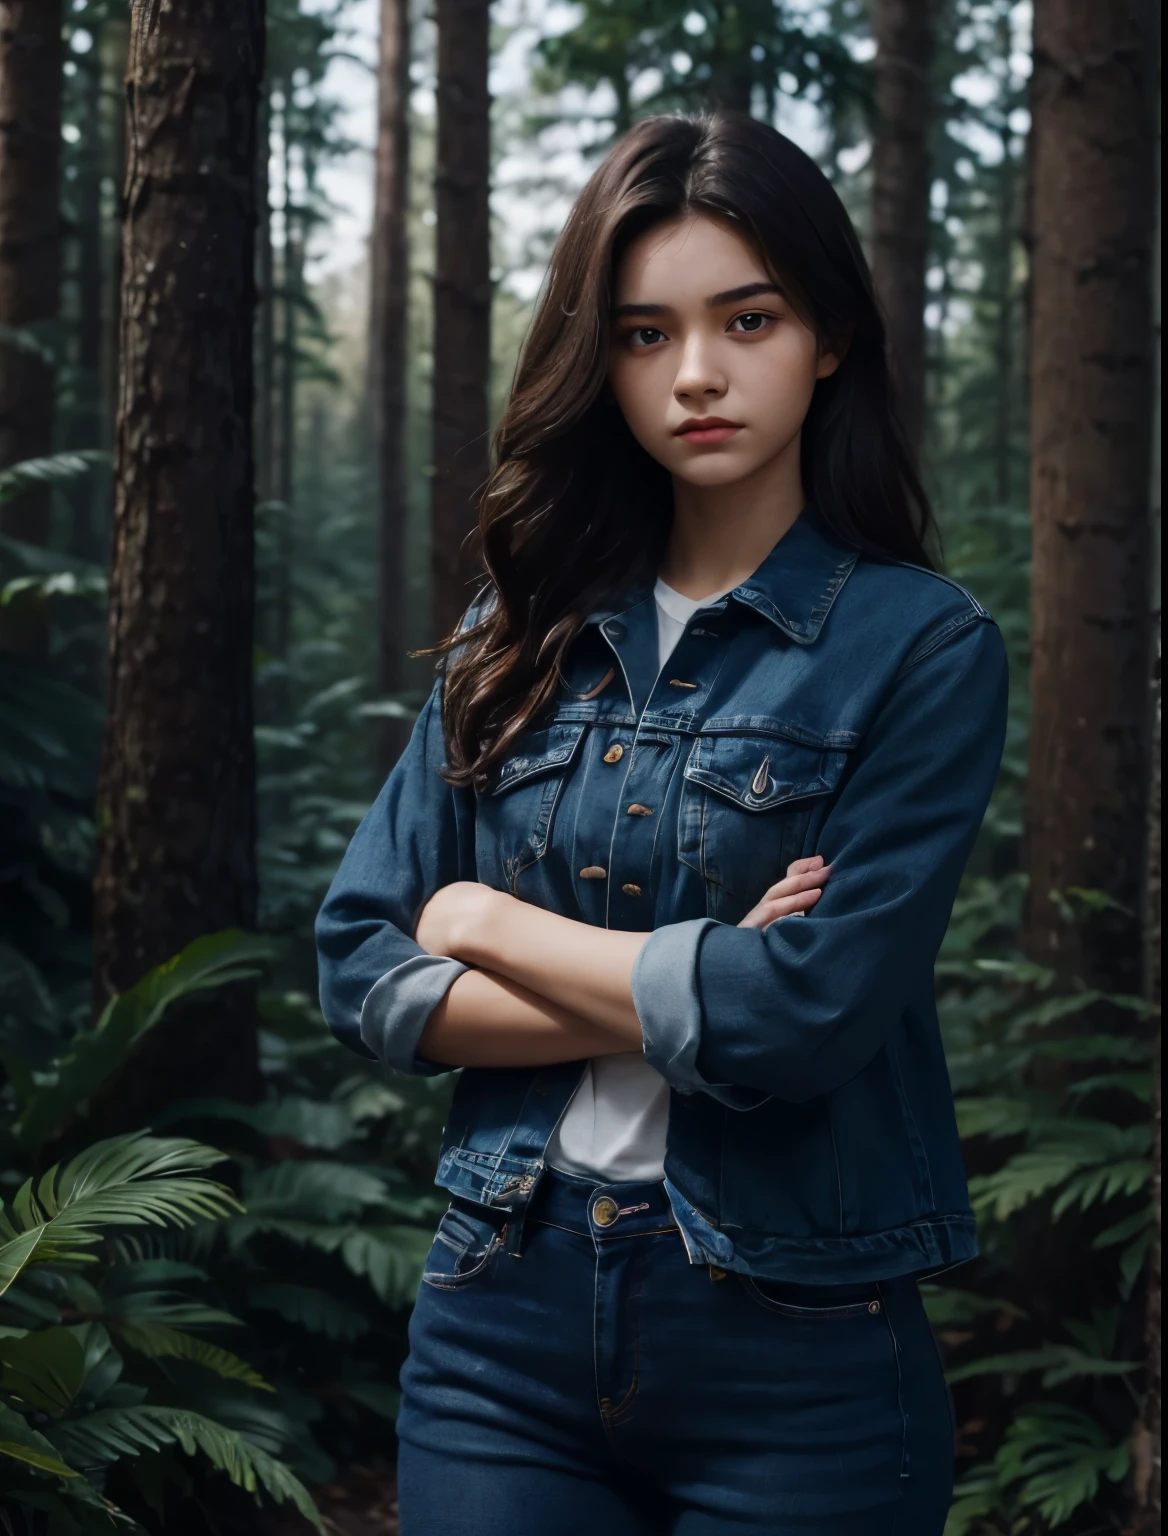 A beautiful woman. Fifteen years old. She has her arms crossed and a defiant look on her face. She's wearing blue jeans. Dark brown hair. she is in the forest.